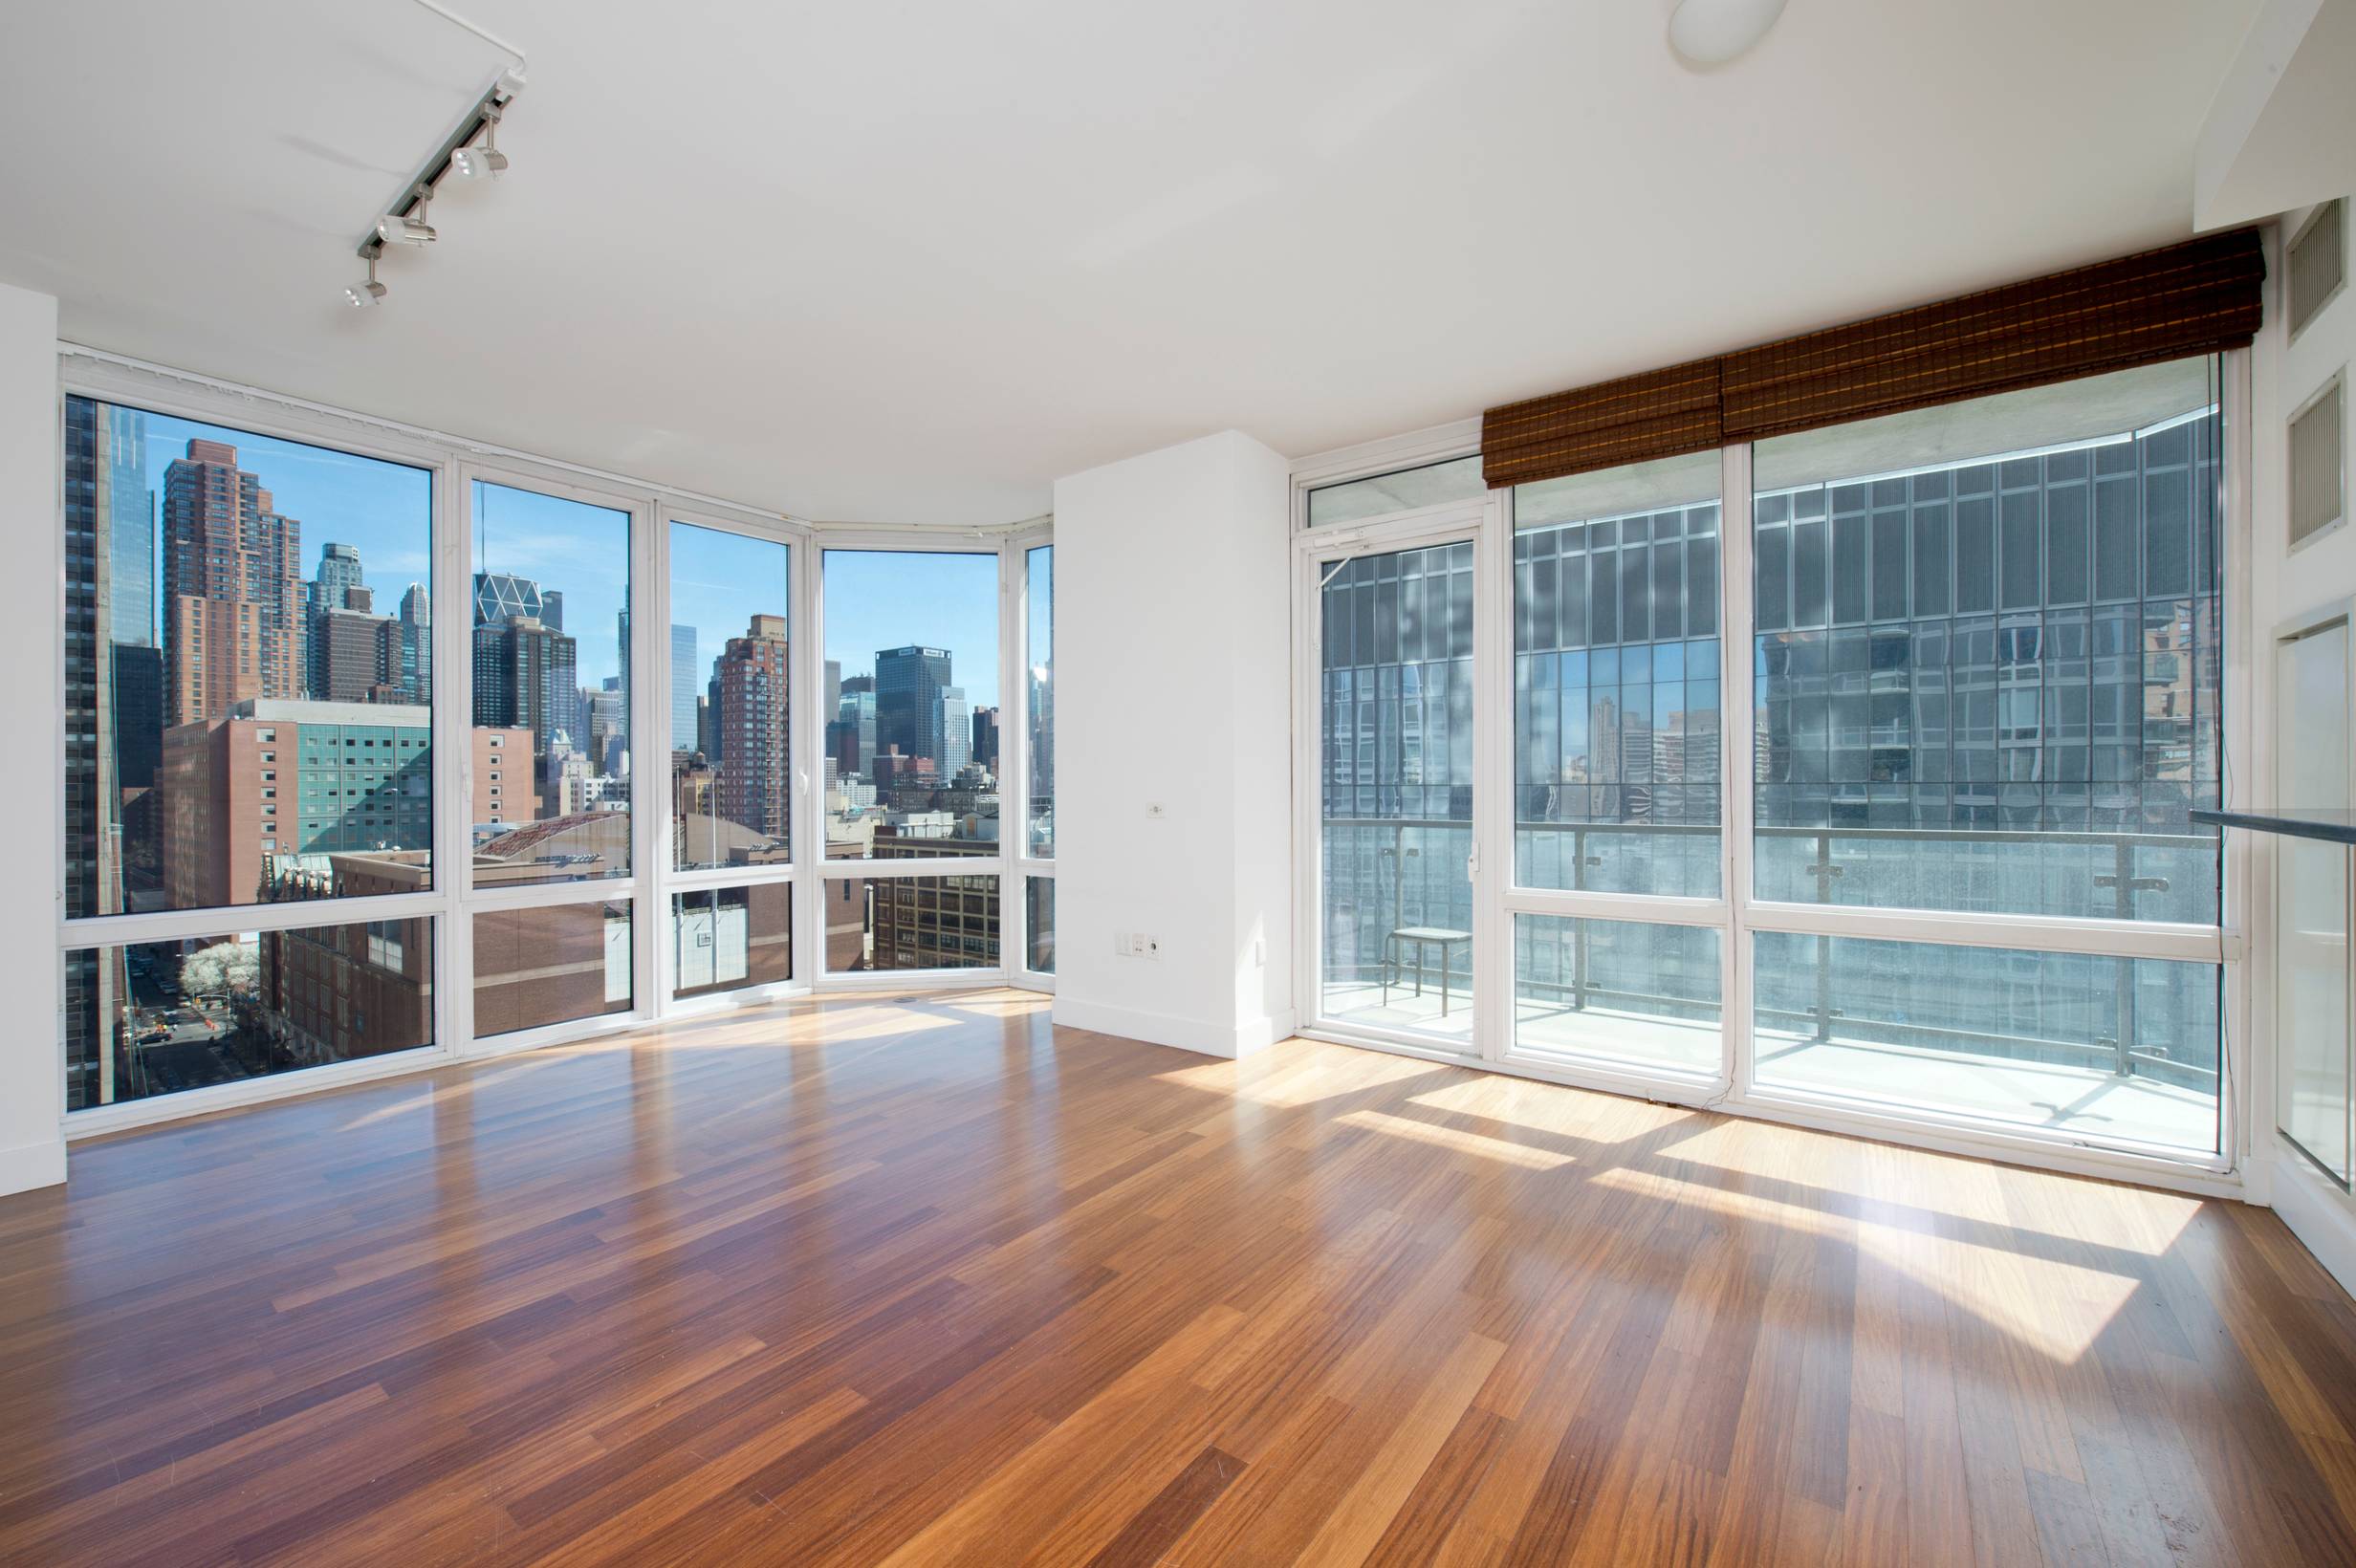 UPPER WEST SIDE, 10 WEST END AVE. FABULOUS,  2  BEDROOM 2 BATH, LUXURY CONDOMINIUM RENTAL WITH AMAZING VIEWS AND A LARGE BALCONY